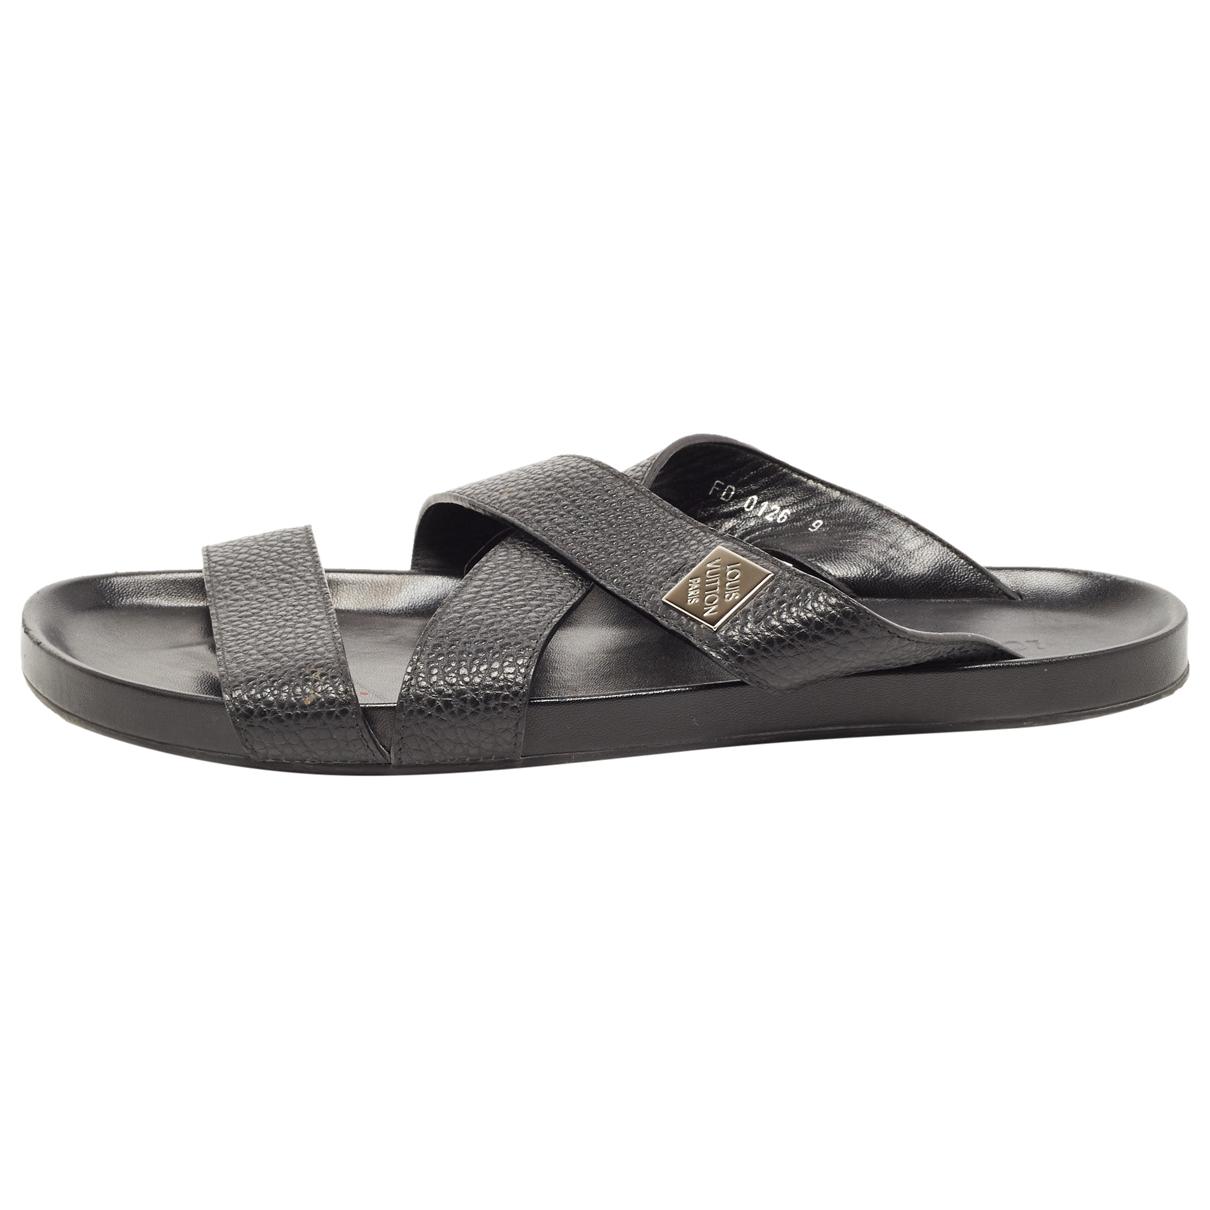 Leather sandals Louis Vuitton Black size 43 EU in Leather - 35258306